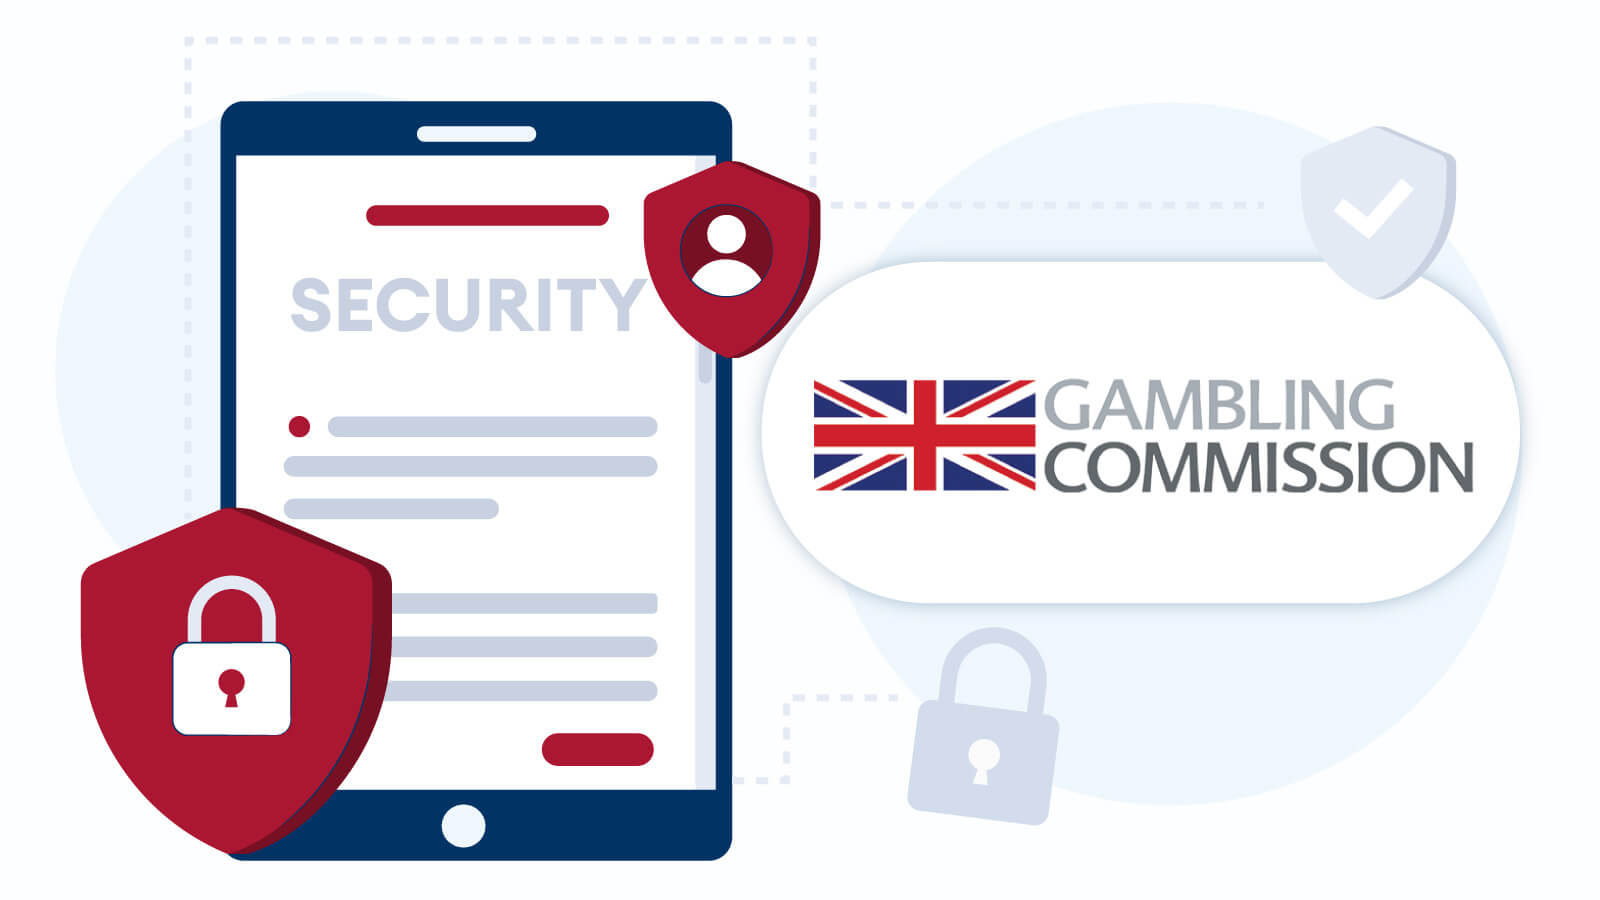 How the UKGC Protects Your Security